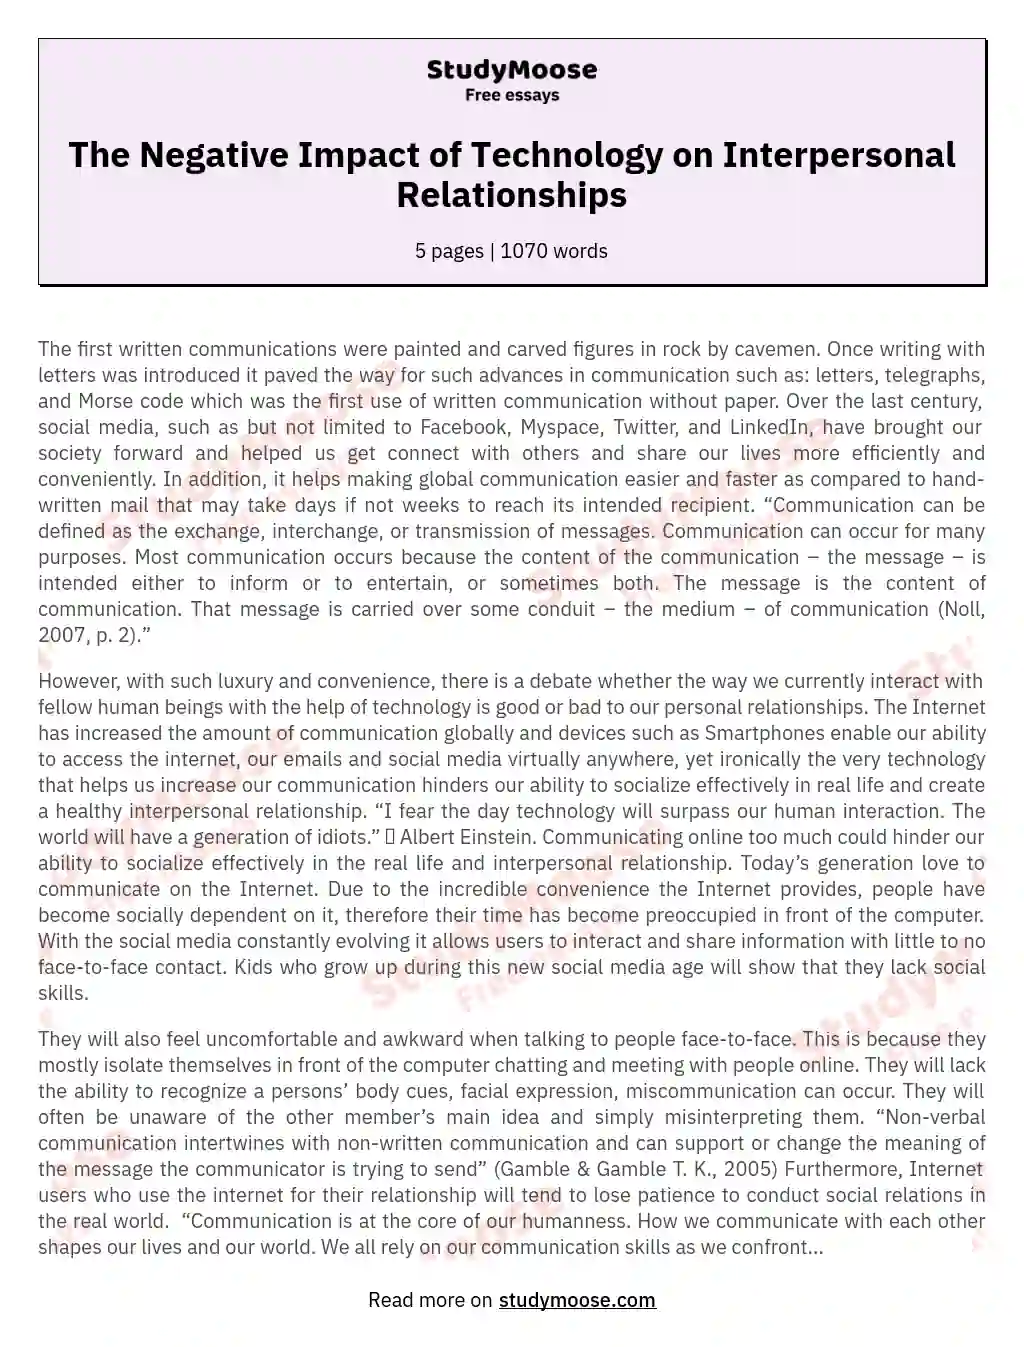 The Negative Impact of Technology on Interpersonal Relationships essay